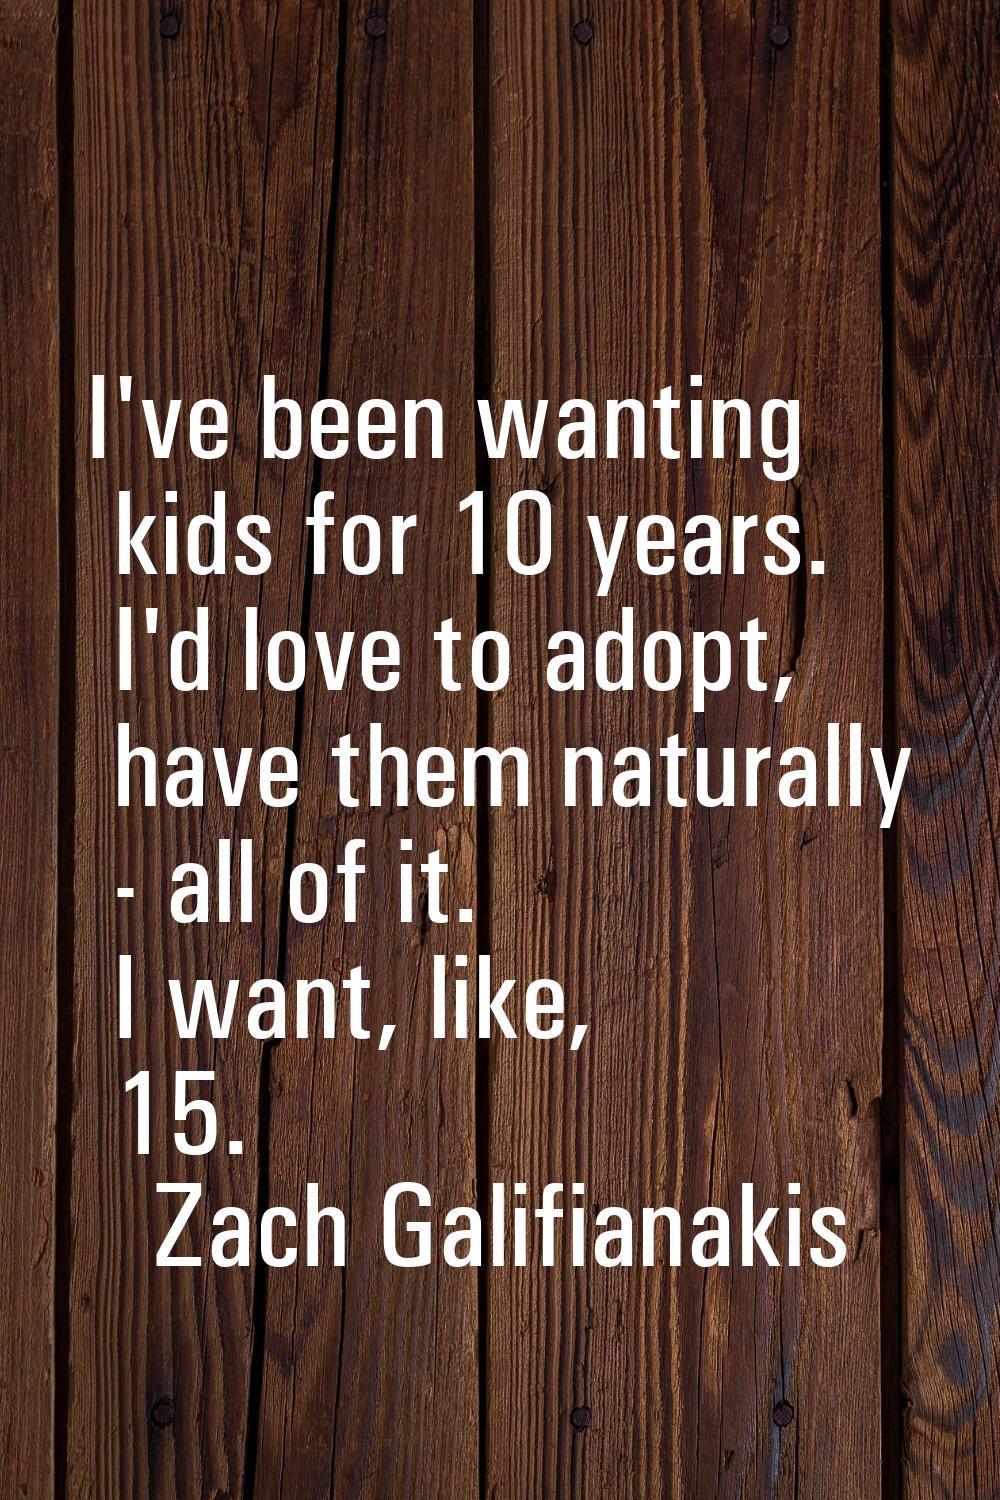 I've been wanting kids for 10 years. I'd love to adopt, have them naturally - all of it. I want, li